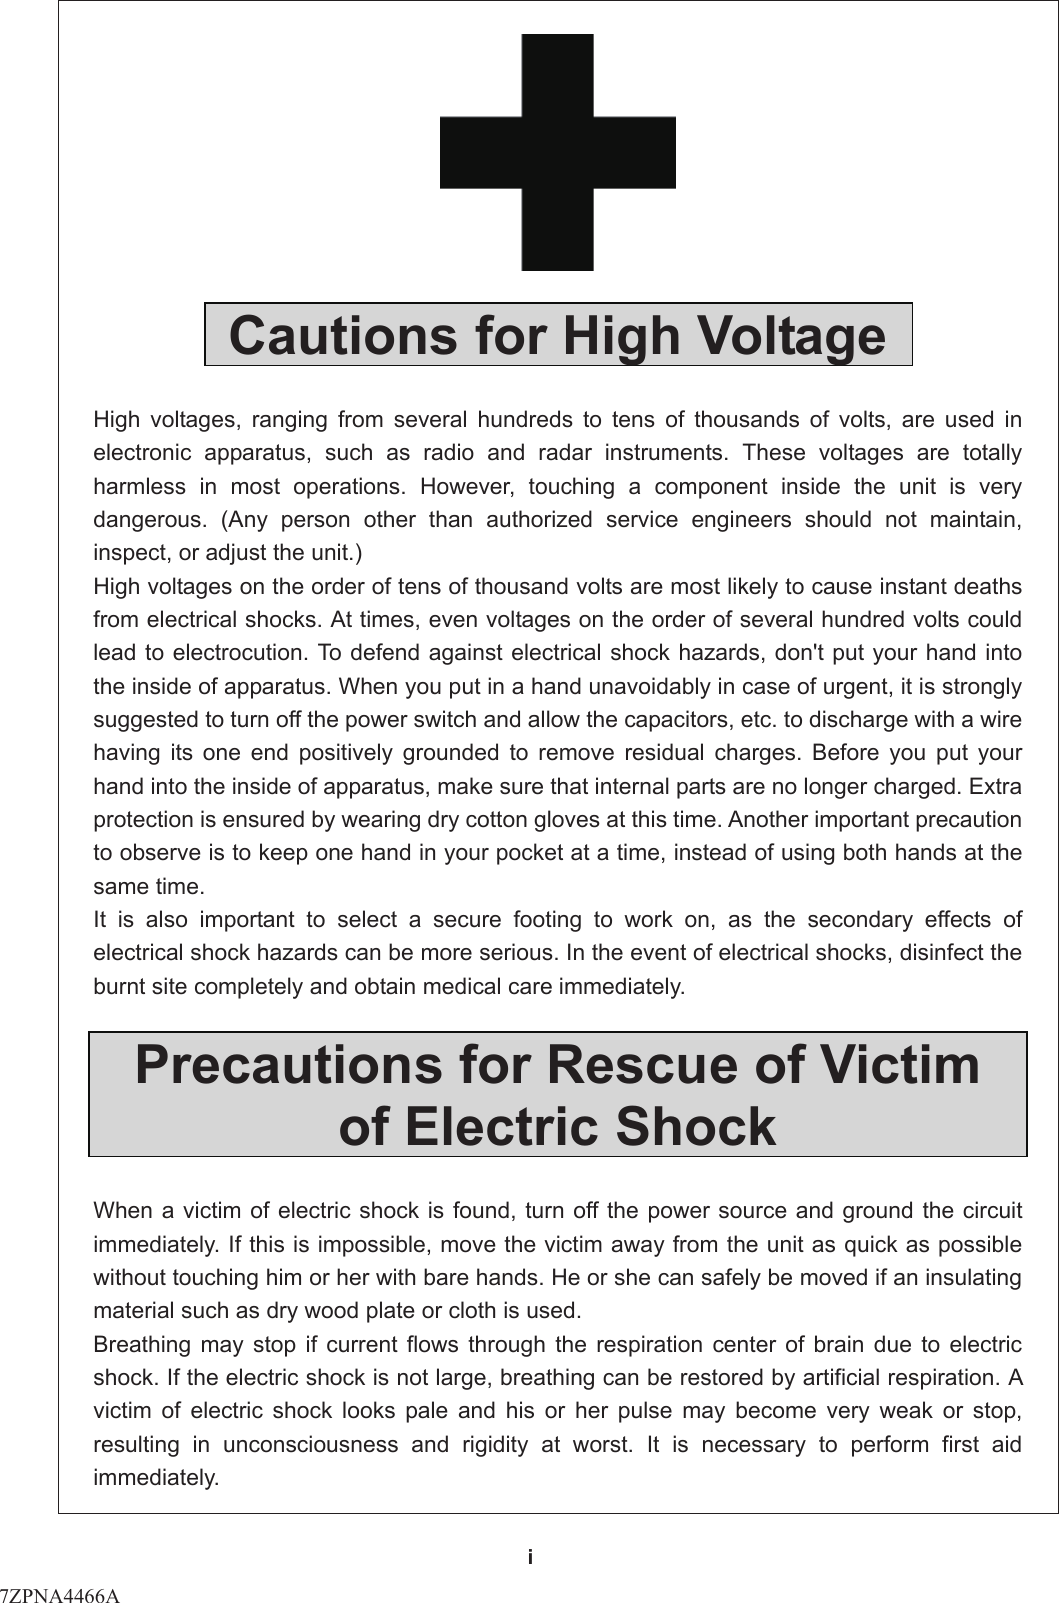 i     Cautions for High Voltage  High voltages, ranging from several hundreds to tens of thousands of volts, are used in electronic apparatus, such as radio and radar instruments. These voltages are totally harmless in most operations. However, touching a component inside the unit is very dangerous. (Any person other than authorized service engineers should not maintain, inspect, or adjust the unit.)   High voltages on the order of tens of thousand volts are most likely to cause instant deaths from electrical shocks. At times, even voltages on the order of several hundred volts could lead to electrocution. To defend against electrical shock hazards, don&apos;t put your hand into the inside of apparatus. When you put in a hand unavoidably in case of urgent, it is strongly suggested to turn off the power switch and allow the capacitors, etc. to discharge with a wire having its one end positively grounded to remove residual charges. Before you put your hand into the inside of apparatus, make sure that internal parts are no longer charged. Extra protection is ensured by wearing dry cotton gloves at this time. Another important precaution to observe is to keep one hand in your pocket at a time, instead of using both hands at the same time.   It is also important to select a secure footing to work on, as the secondary effects of electrical shock hazards can be more serious. In the event of electrical shocks, disinfect the burnt site completely and obtain medical care immediately.    Precautions for Rescue of Victim of Electric Shock  When a victim of electric shock is found, turn off the power source and ground the circuit immediately. If this is impossible, move the victim away from the unit as quick as possible without touching him or her with bare hands. He or she can safely be moved if an insulating material such as dry wood plate or cloth is used.   Breathing may stop if current flows through the respiration center of brain due to electric shock. If the electric shock is not large, breathing can be restored by artificial respiration. A victim of electric shock looks pale and his or her pulse may become very weak or stop, resulting in unconsciousness and rigidity at worst. It is necessary to perform first aid immediately.  7ZPNA4466A